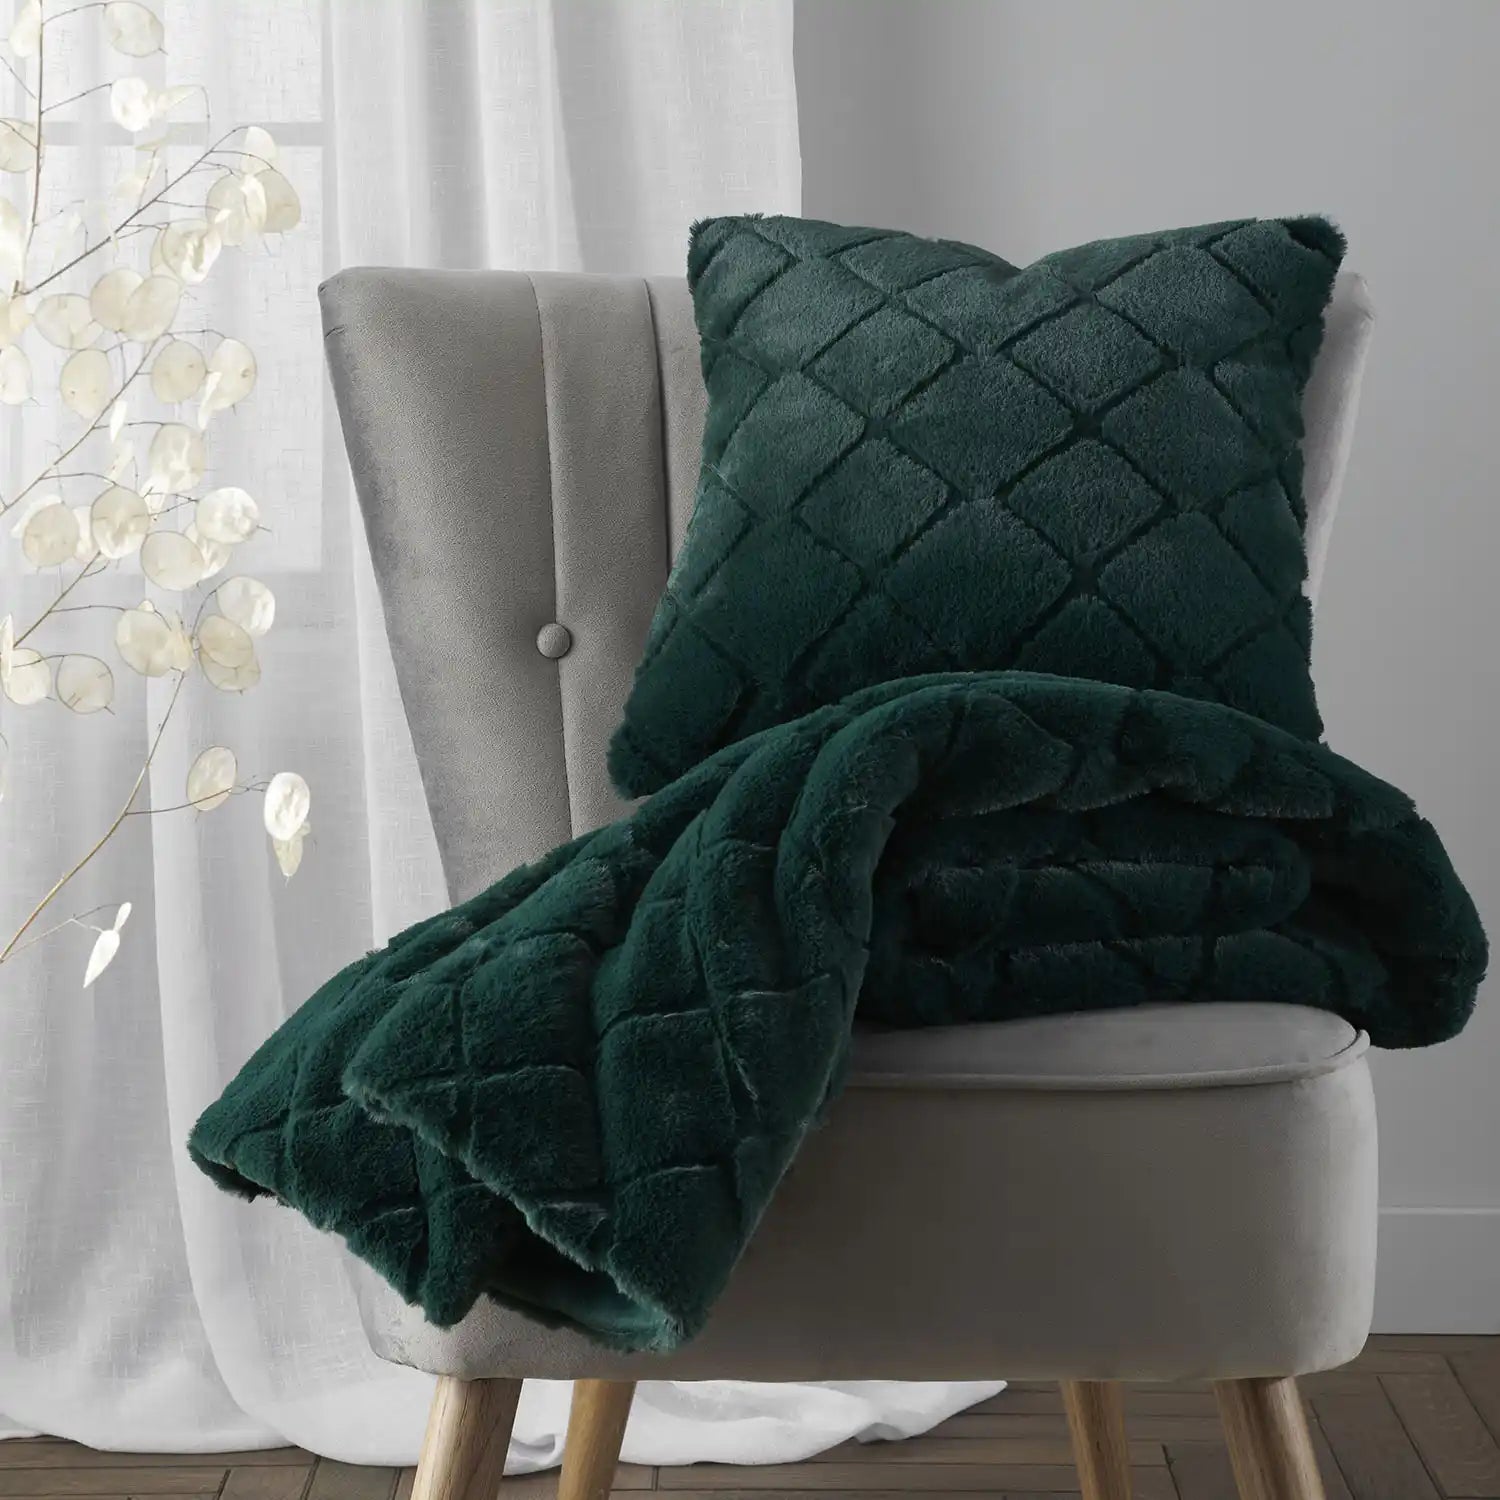 Catherine Lansfield Cosy Diamond Cushion X43 - Green 1 Shaws Department Stores